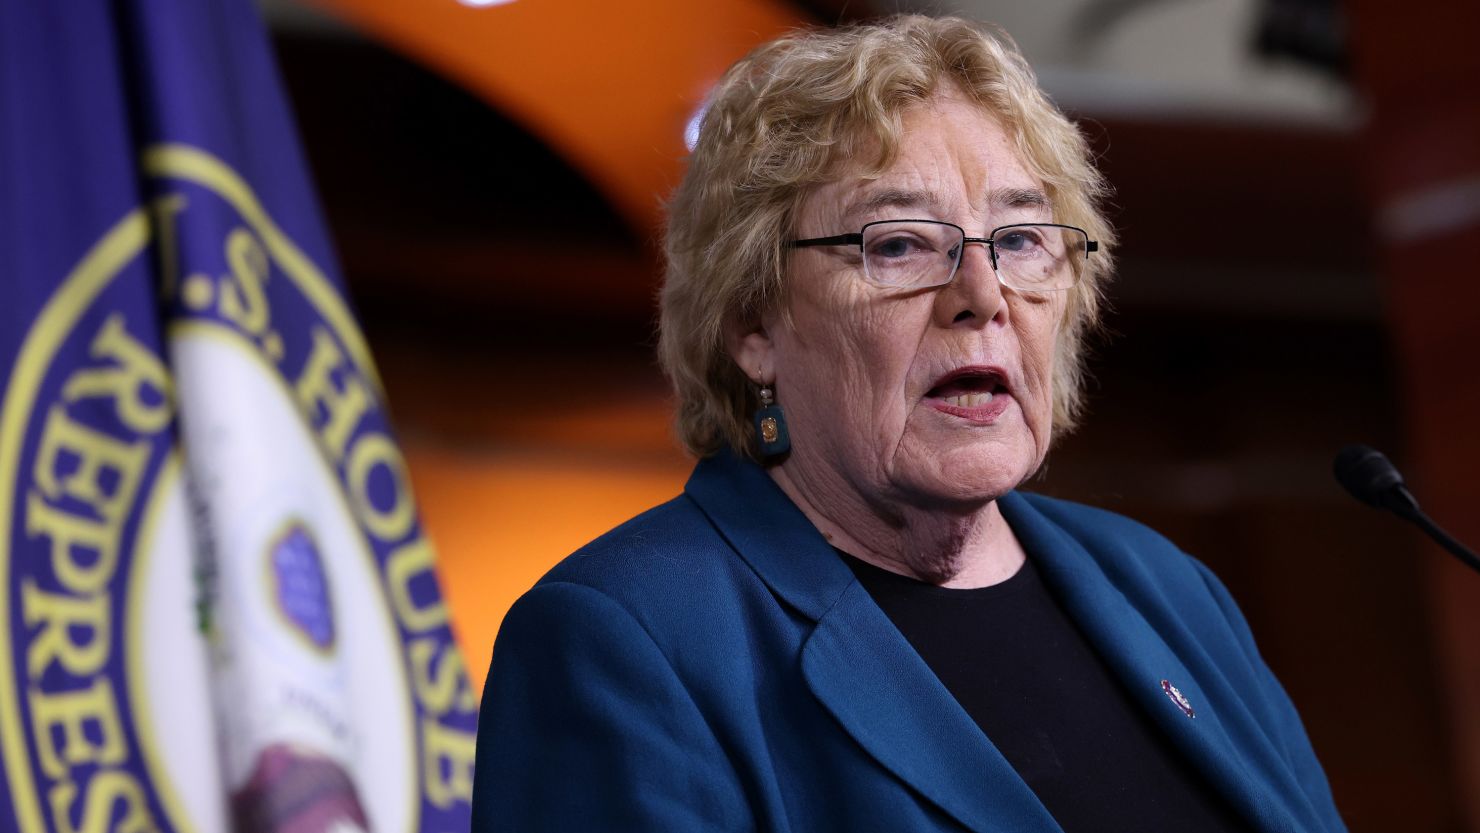 US Rep. Zoe Lofgren, D-Calif., speaks at a news conference at the US Capitol on September 21, 2021 in Washington, DC. 